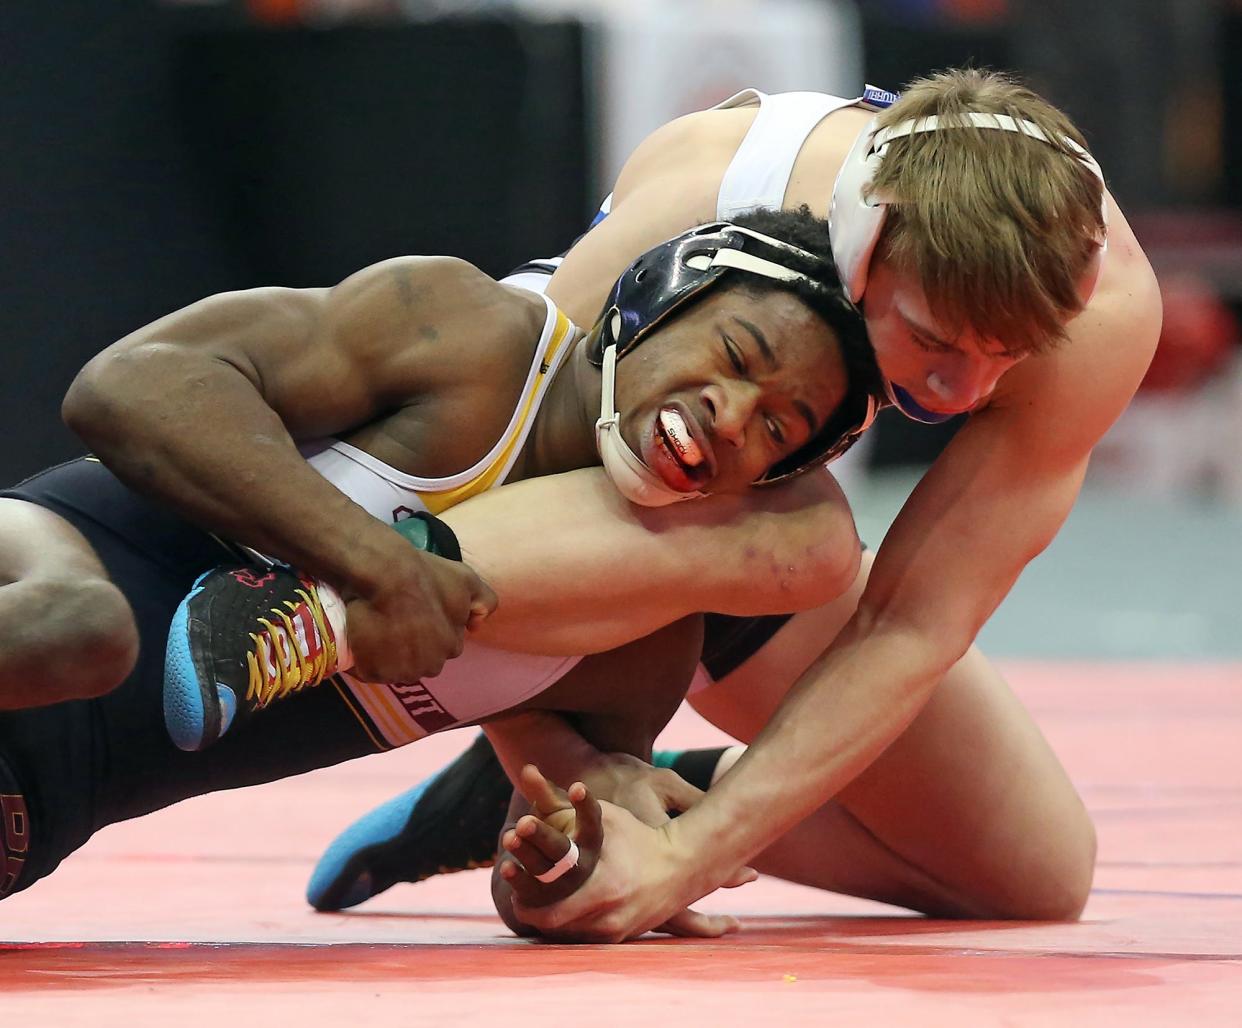 Walsh Jesuit's Dy'Vaire VanDyke, left, works the leg of Springboro's Conner Kleinberg during their 138-pound match in the Division I quarterfinal round of the State Wrestling Tournament Saturday at the Schottenstein Center. [Jeff Lange/Beacon Journal]